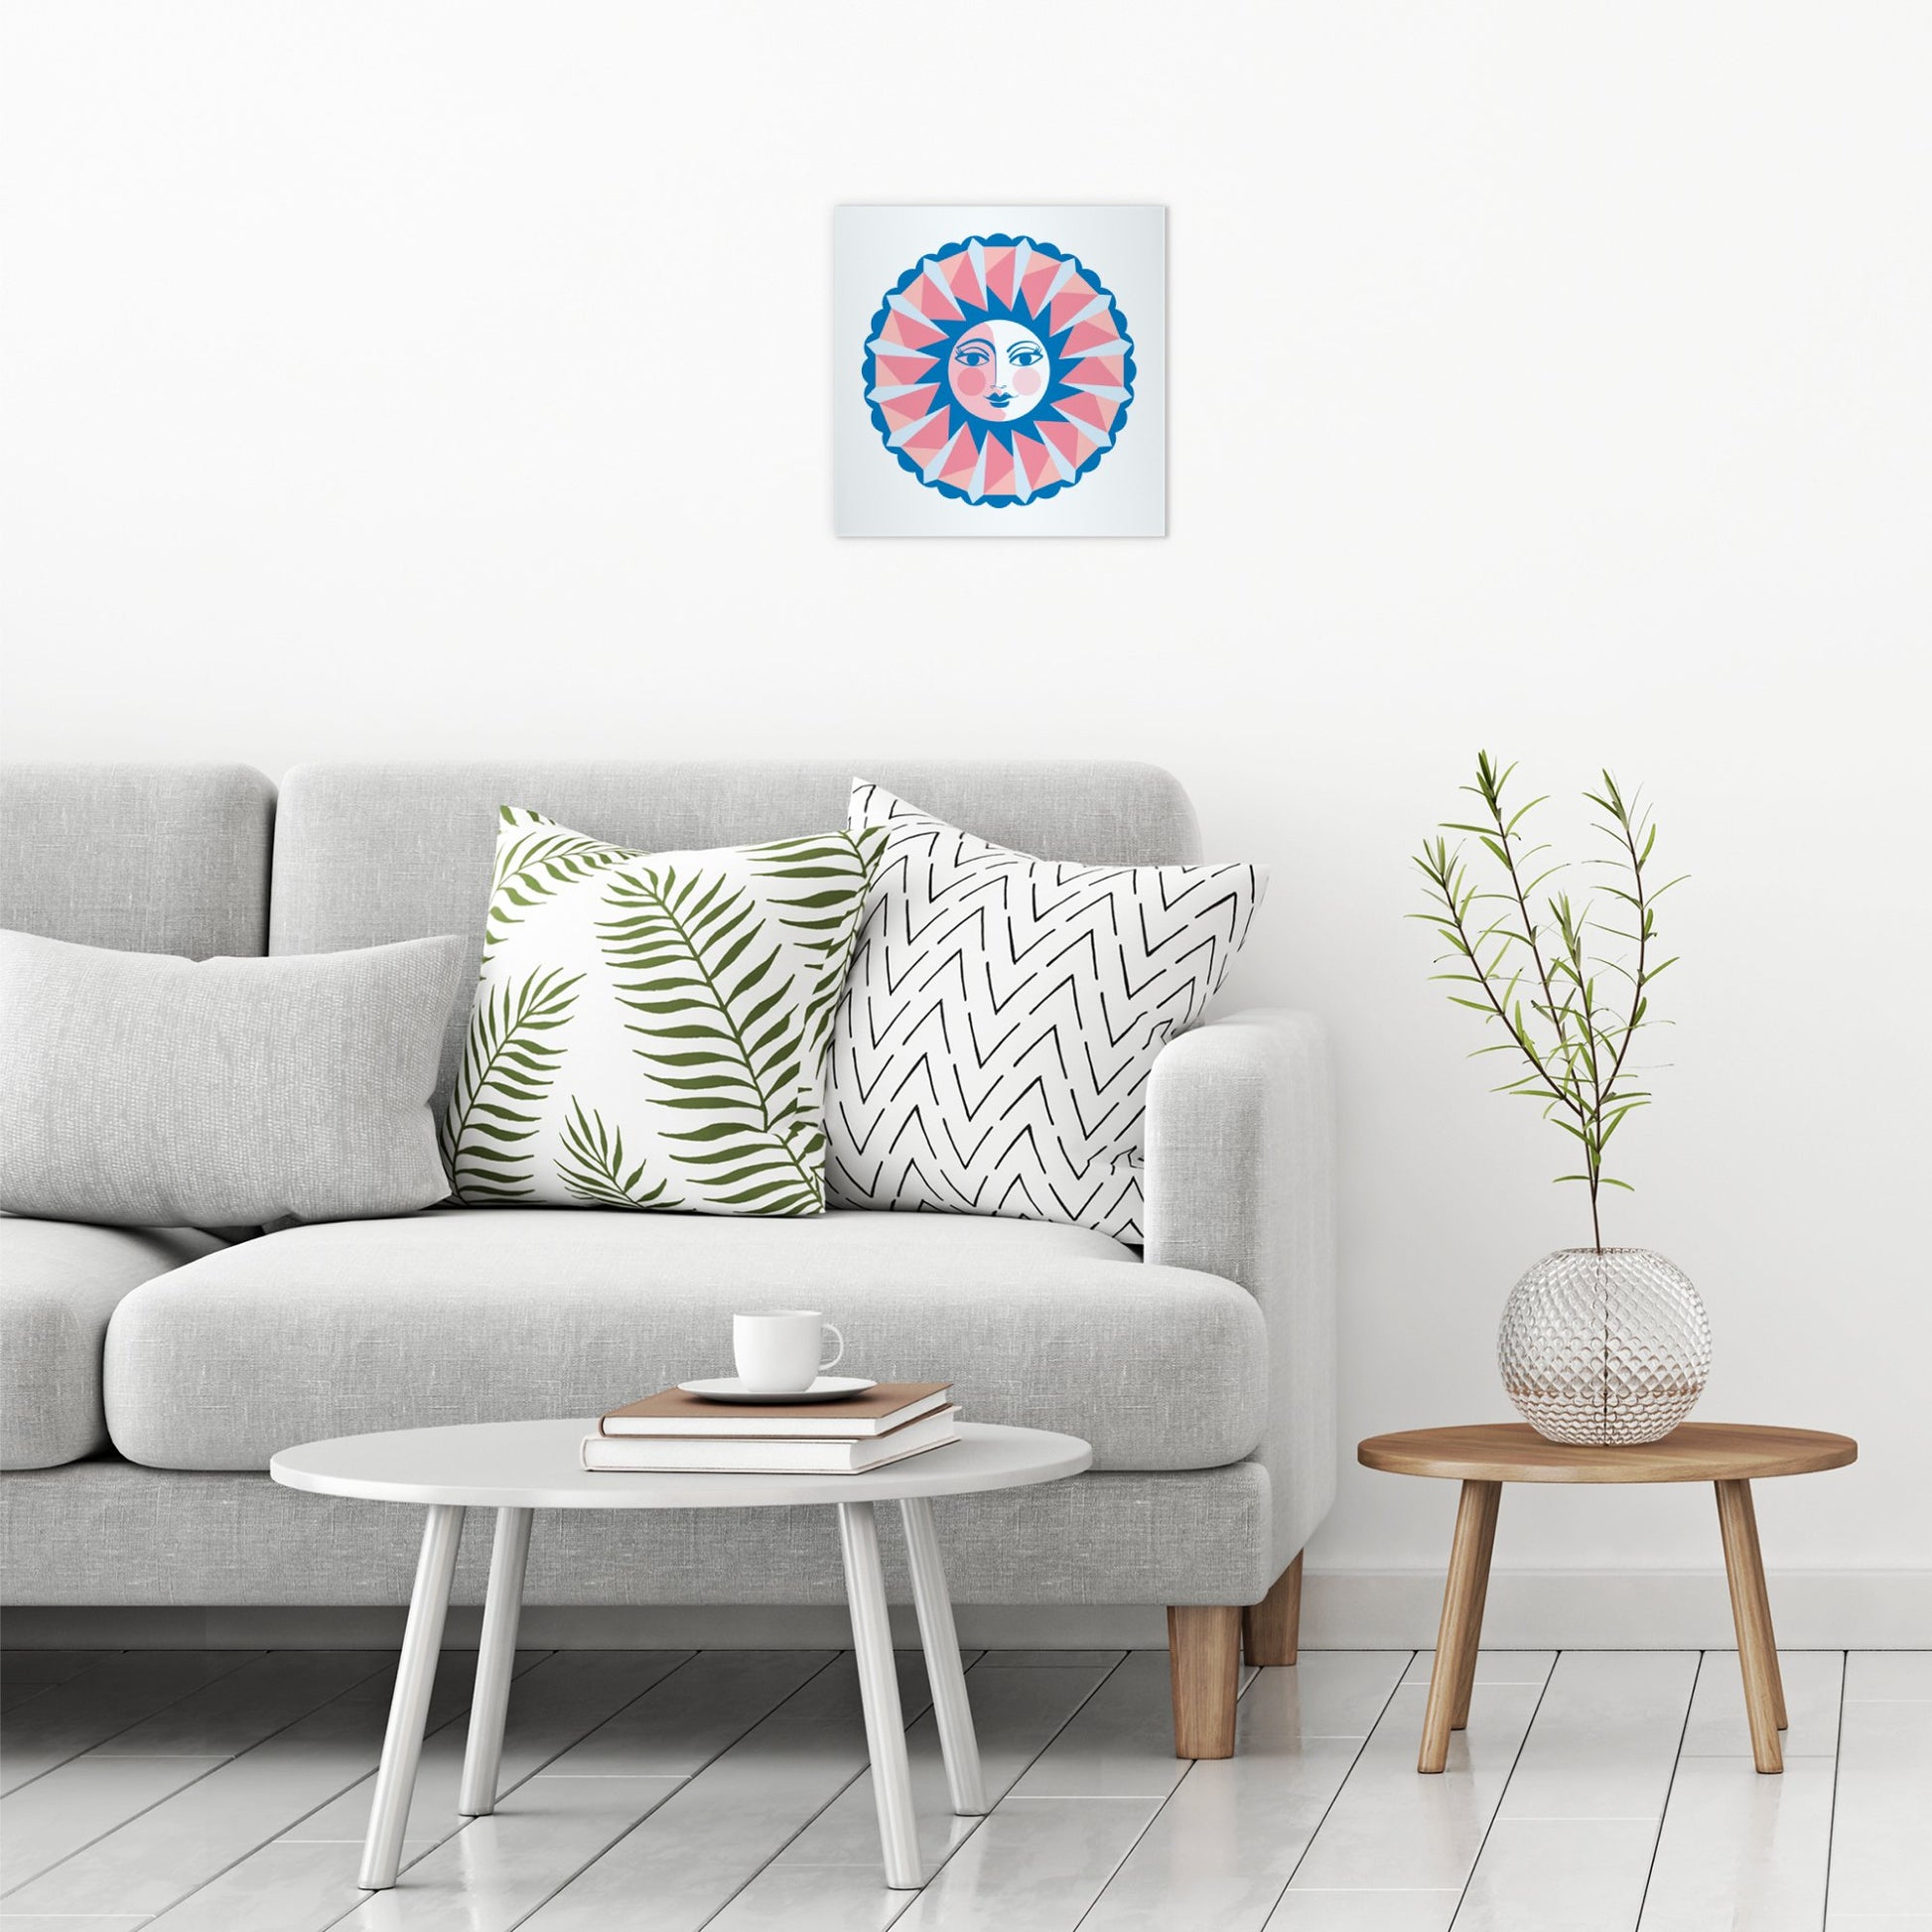 A contemporary modern room view showing a medium size metal art poster display plate with printed design of a Sun Face Design